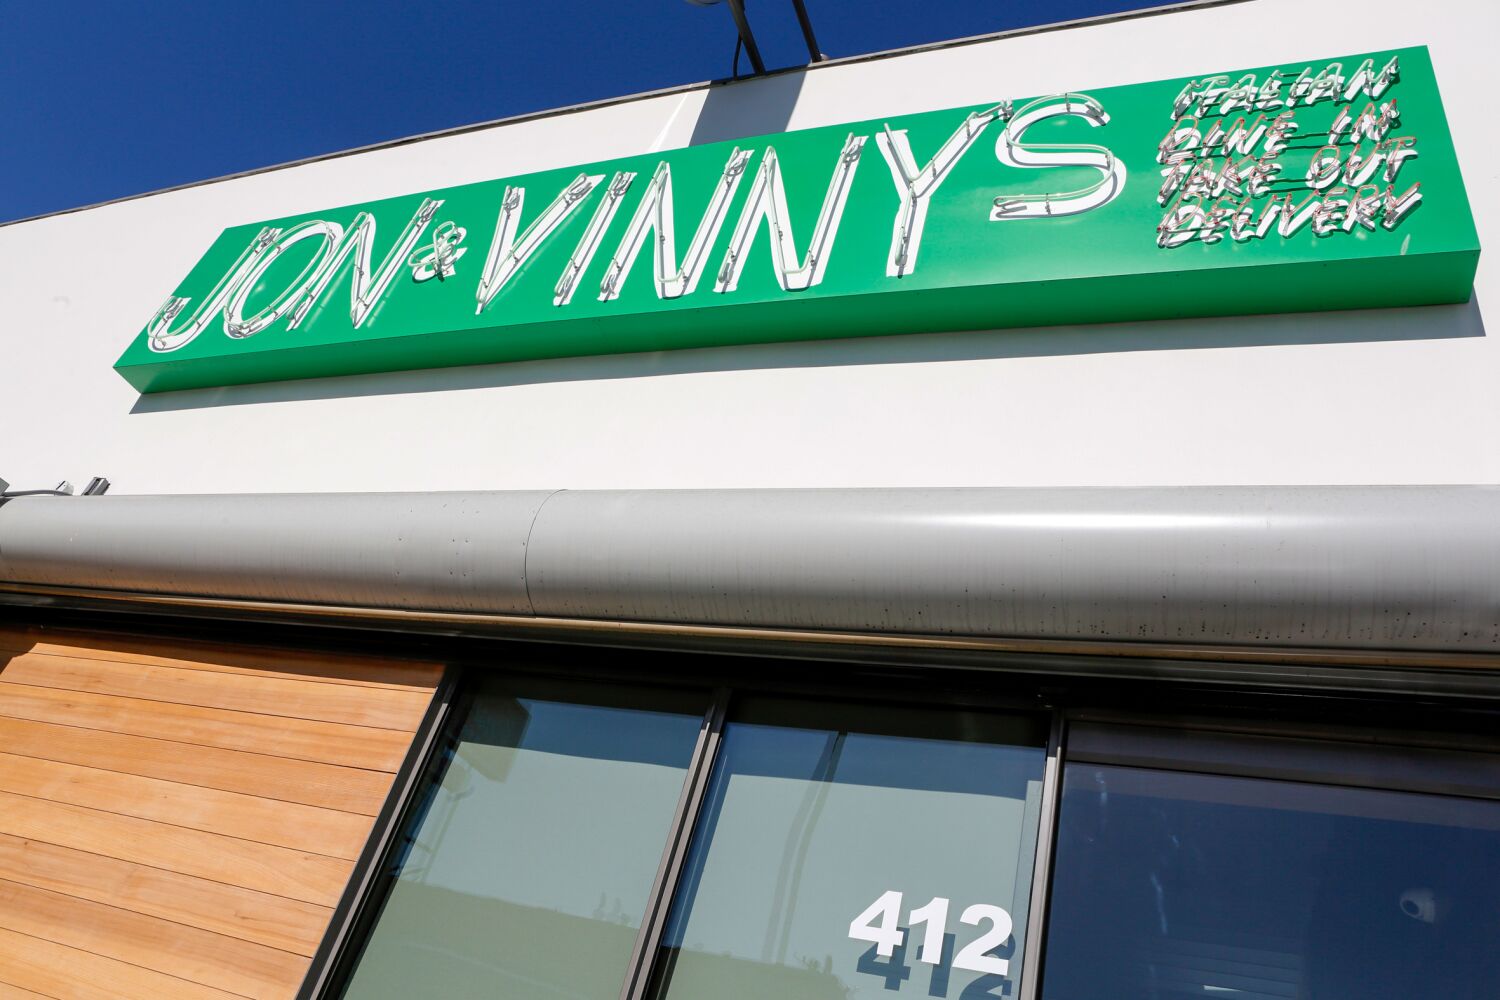 After lawsuit, Jon & Vinny's adds explainer on customer checks about 18% service fee